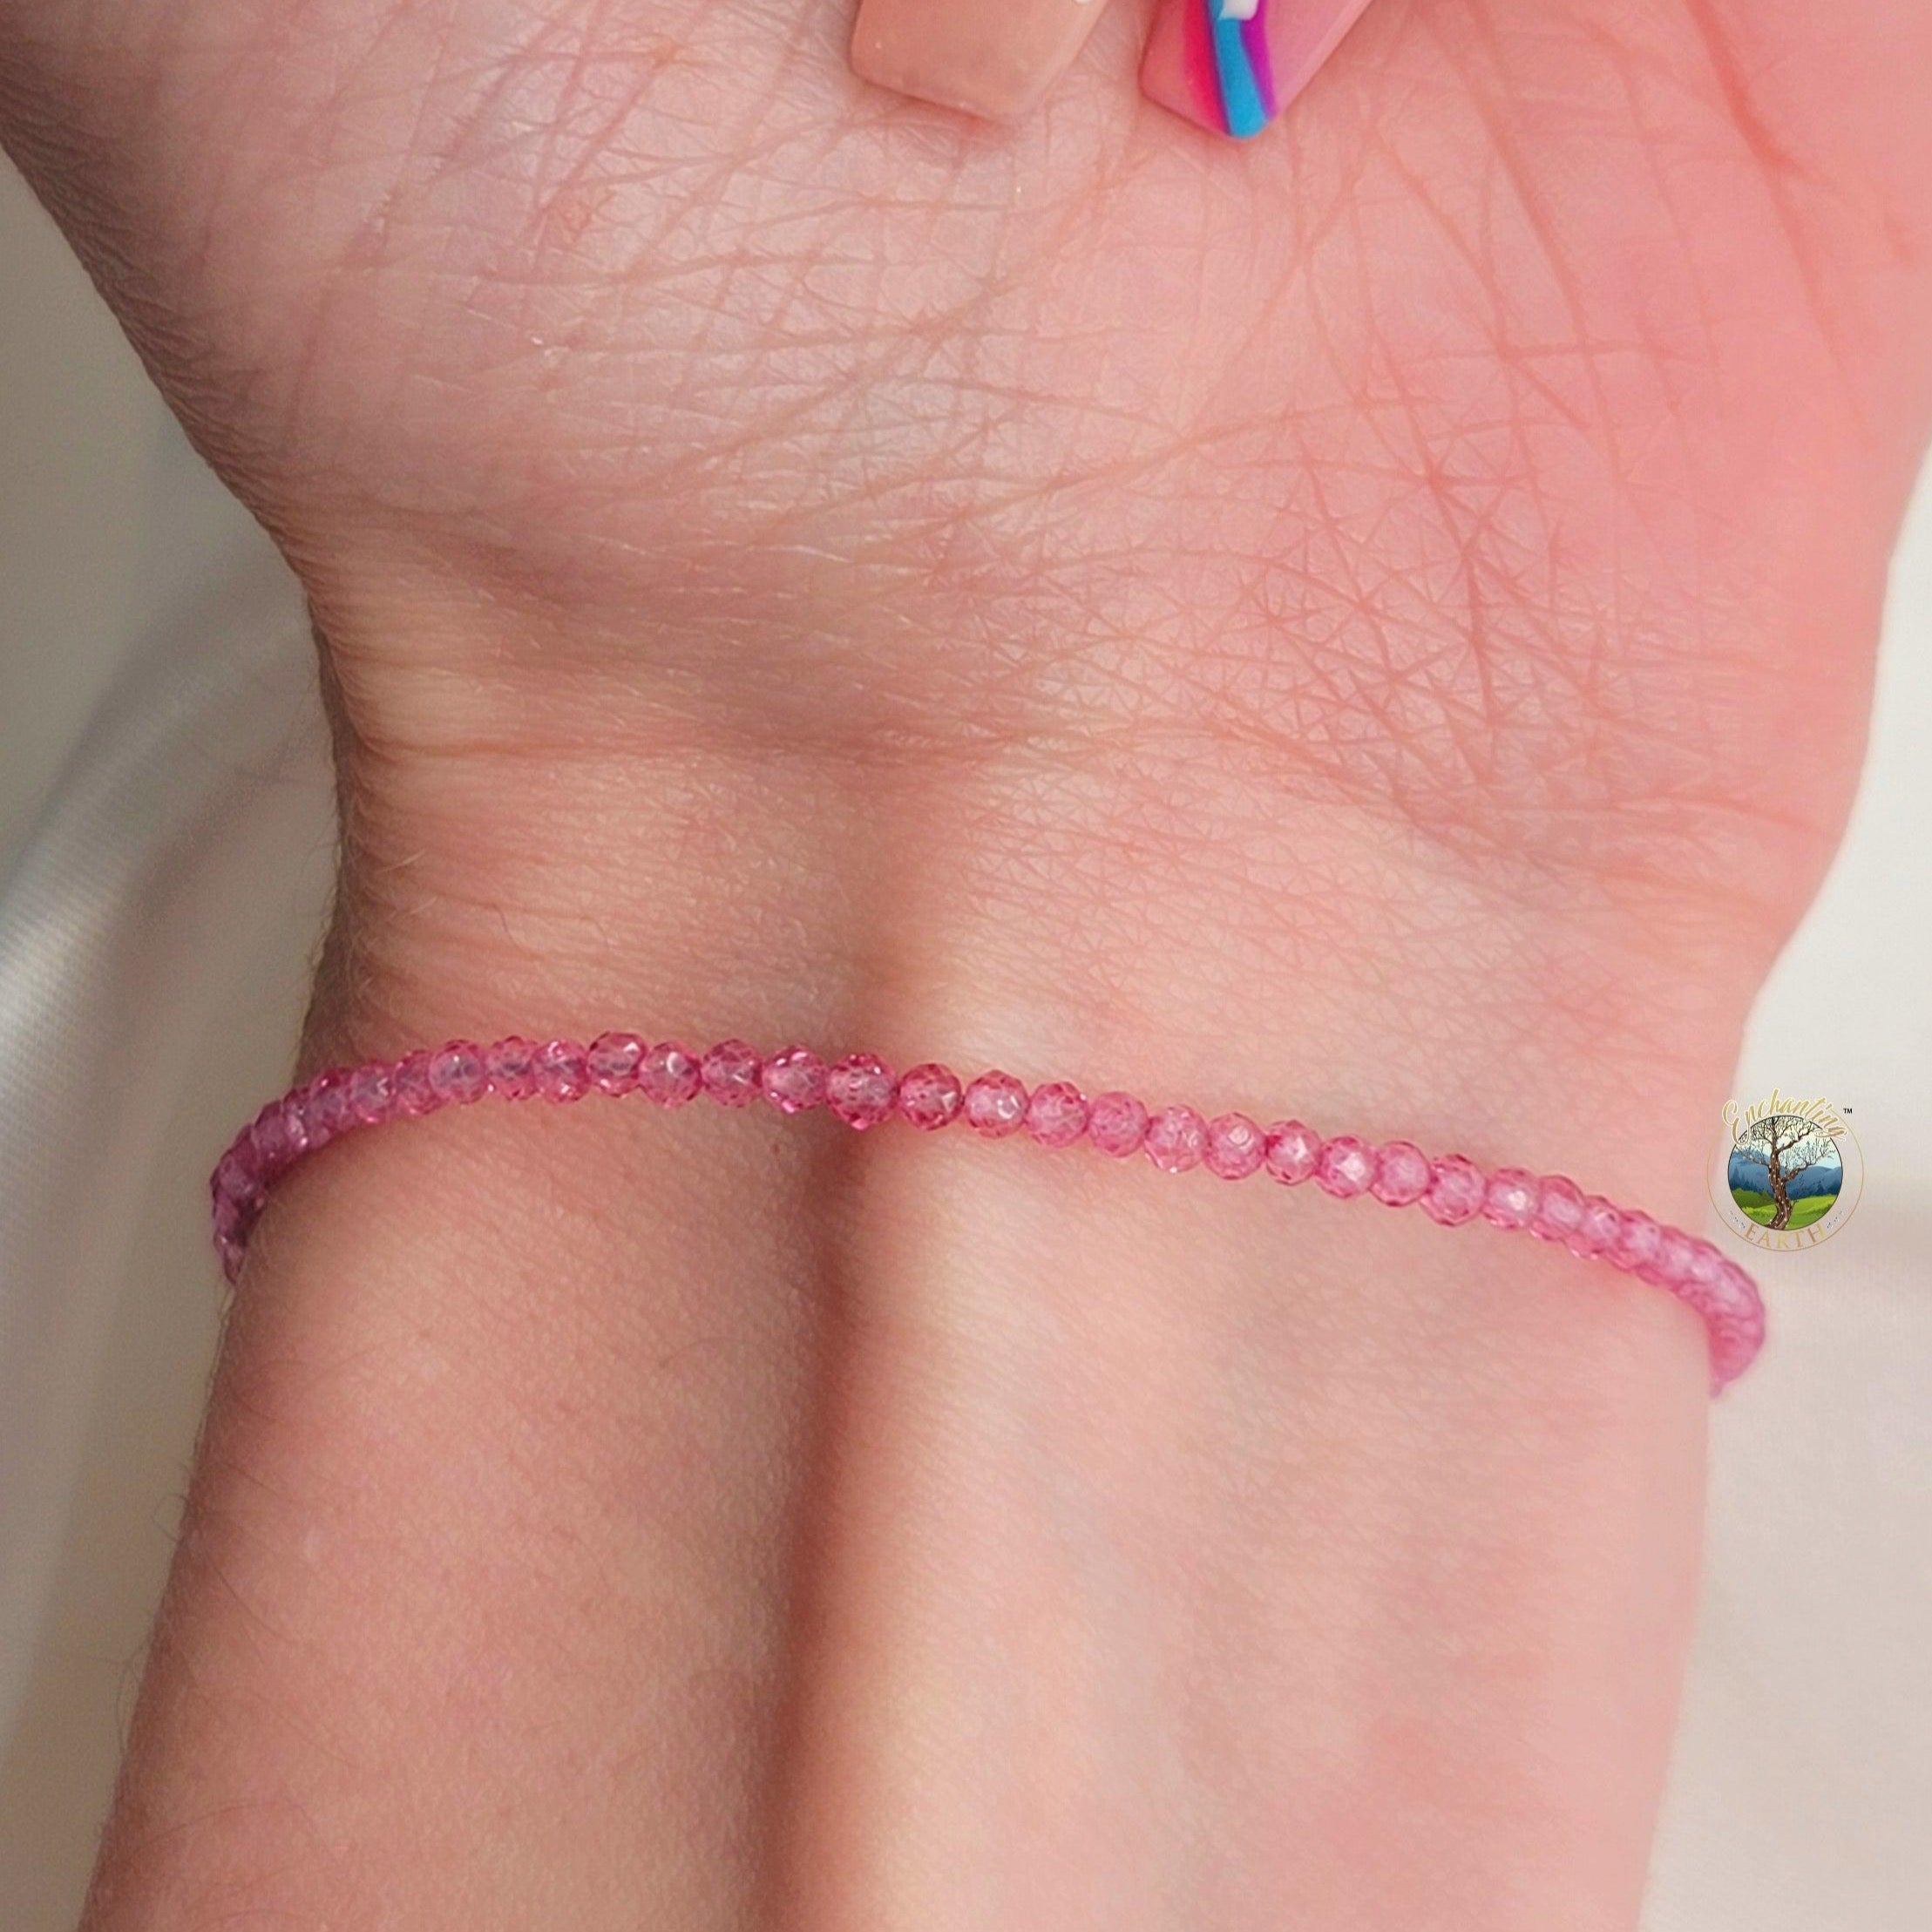 Pink Topaz Micro Faceted Bracelet